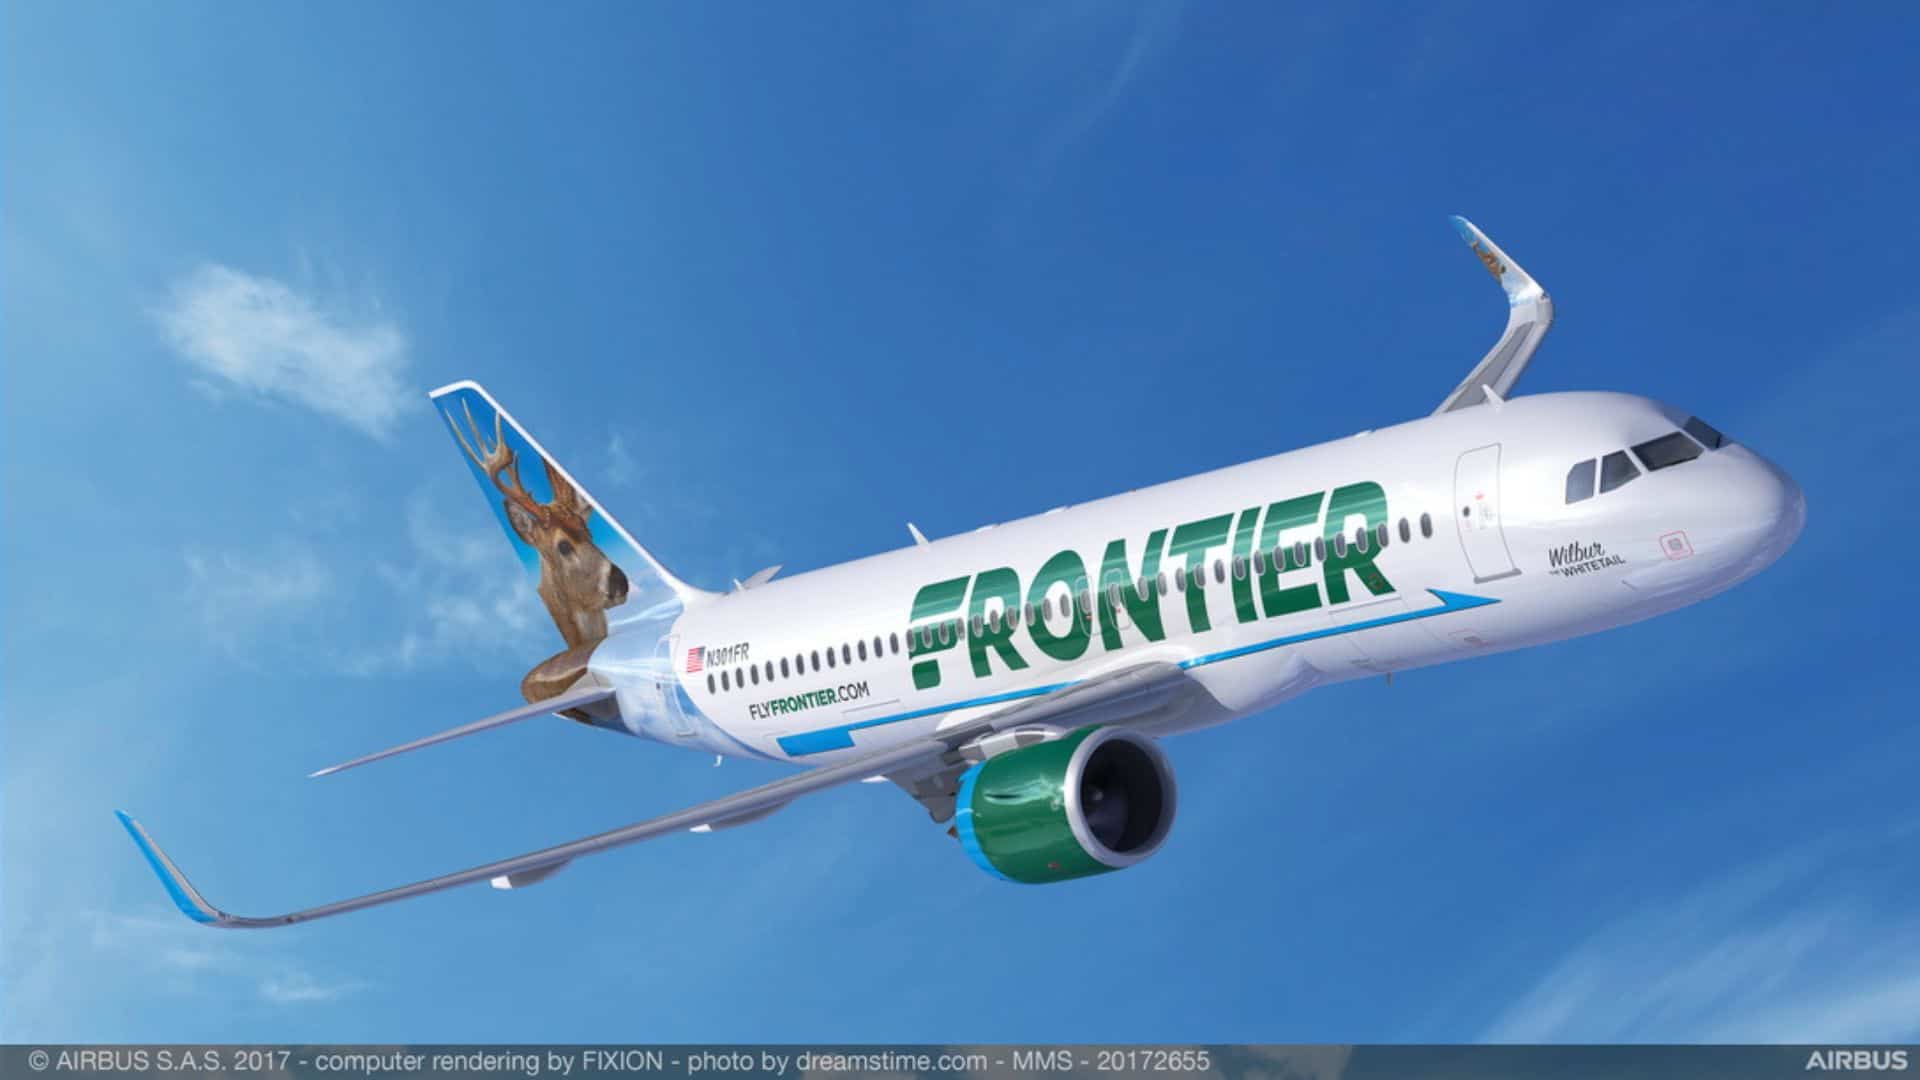 Does Frontier Airlines Have Wifi?